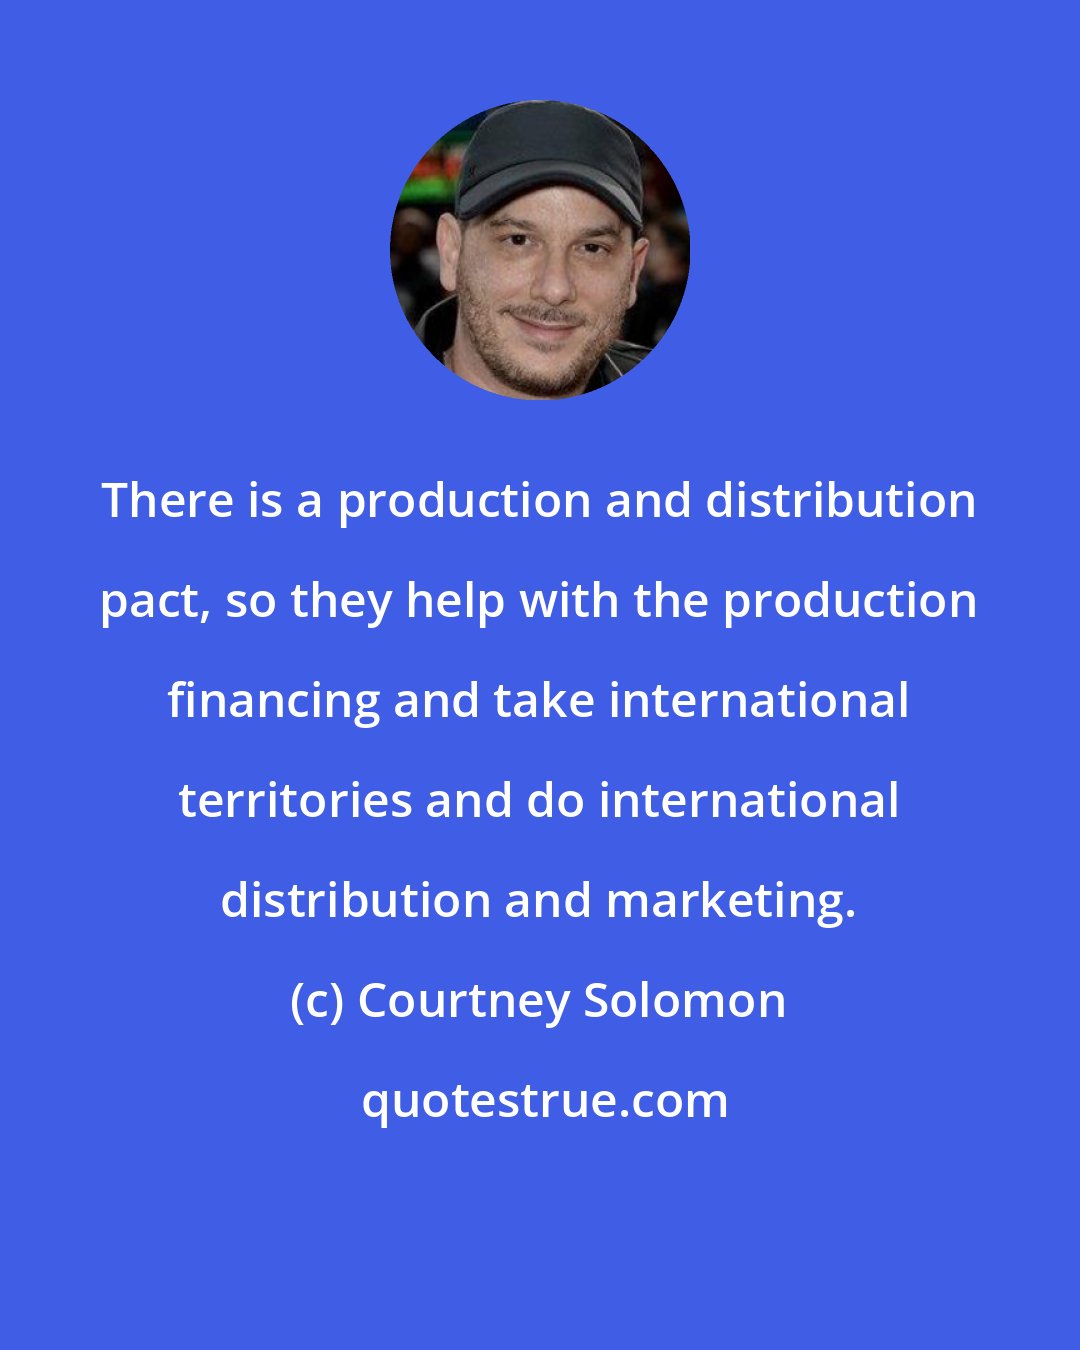 Courtney Solomon: There is a production and distribution pact, so they help with the production financing and take international territories and do international distribution and marketing.